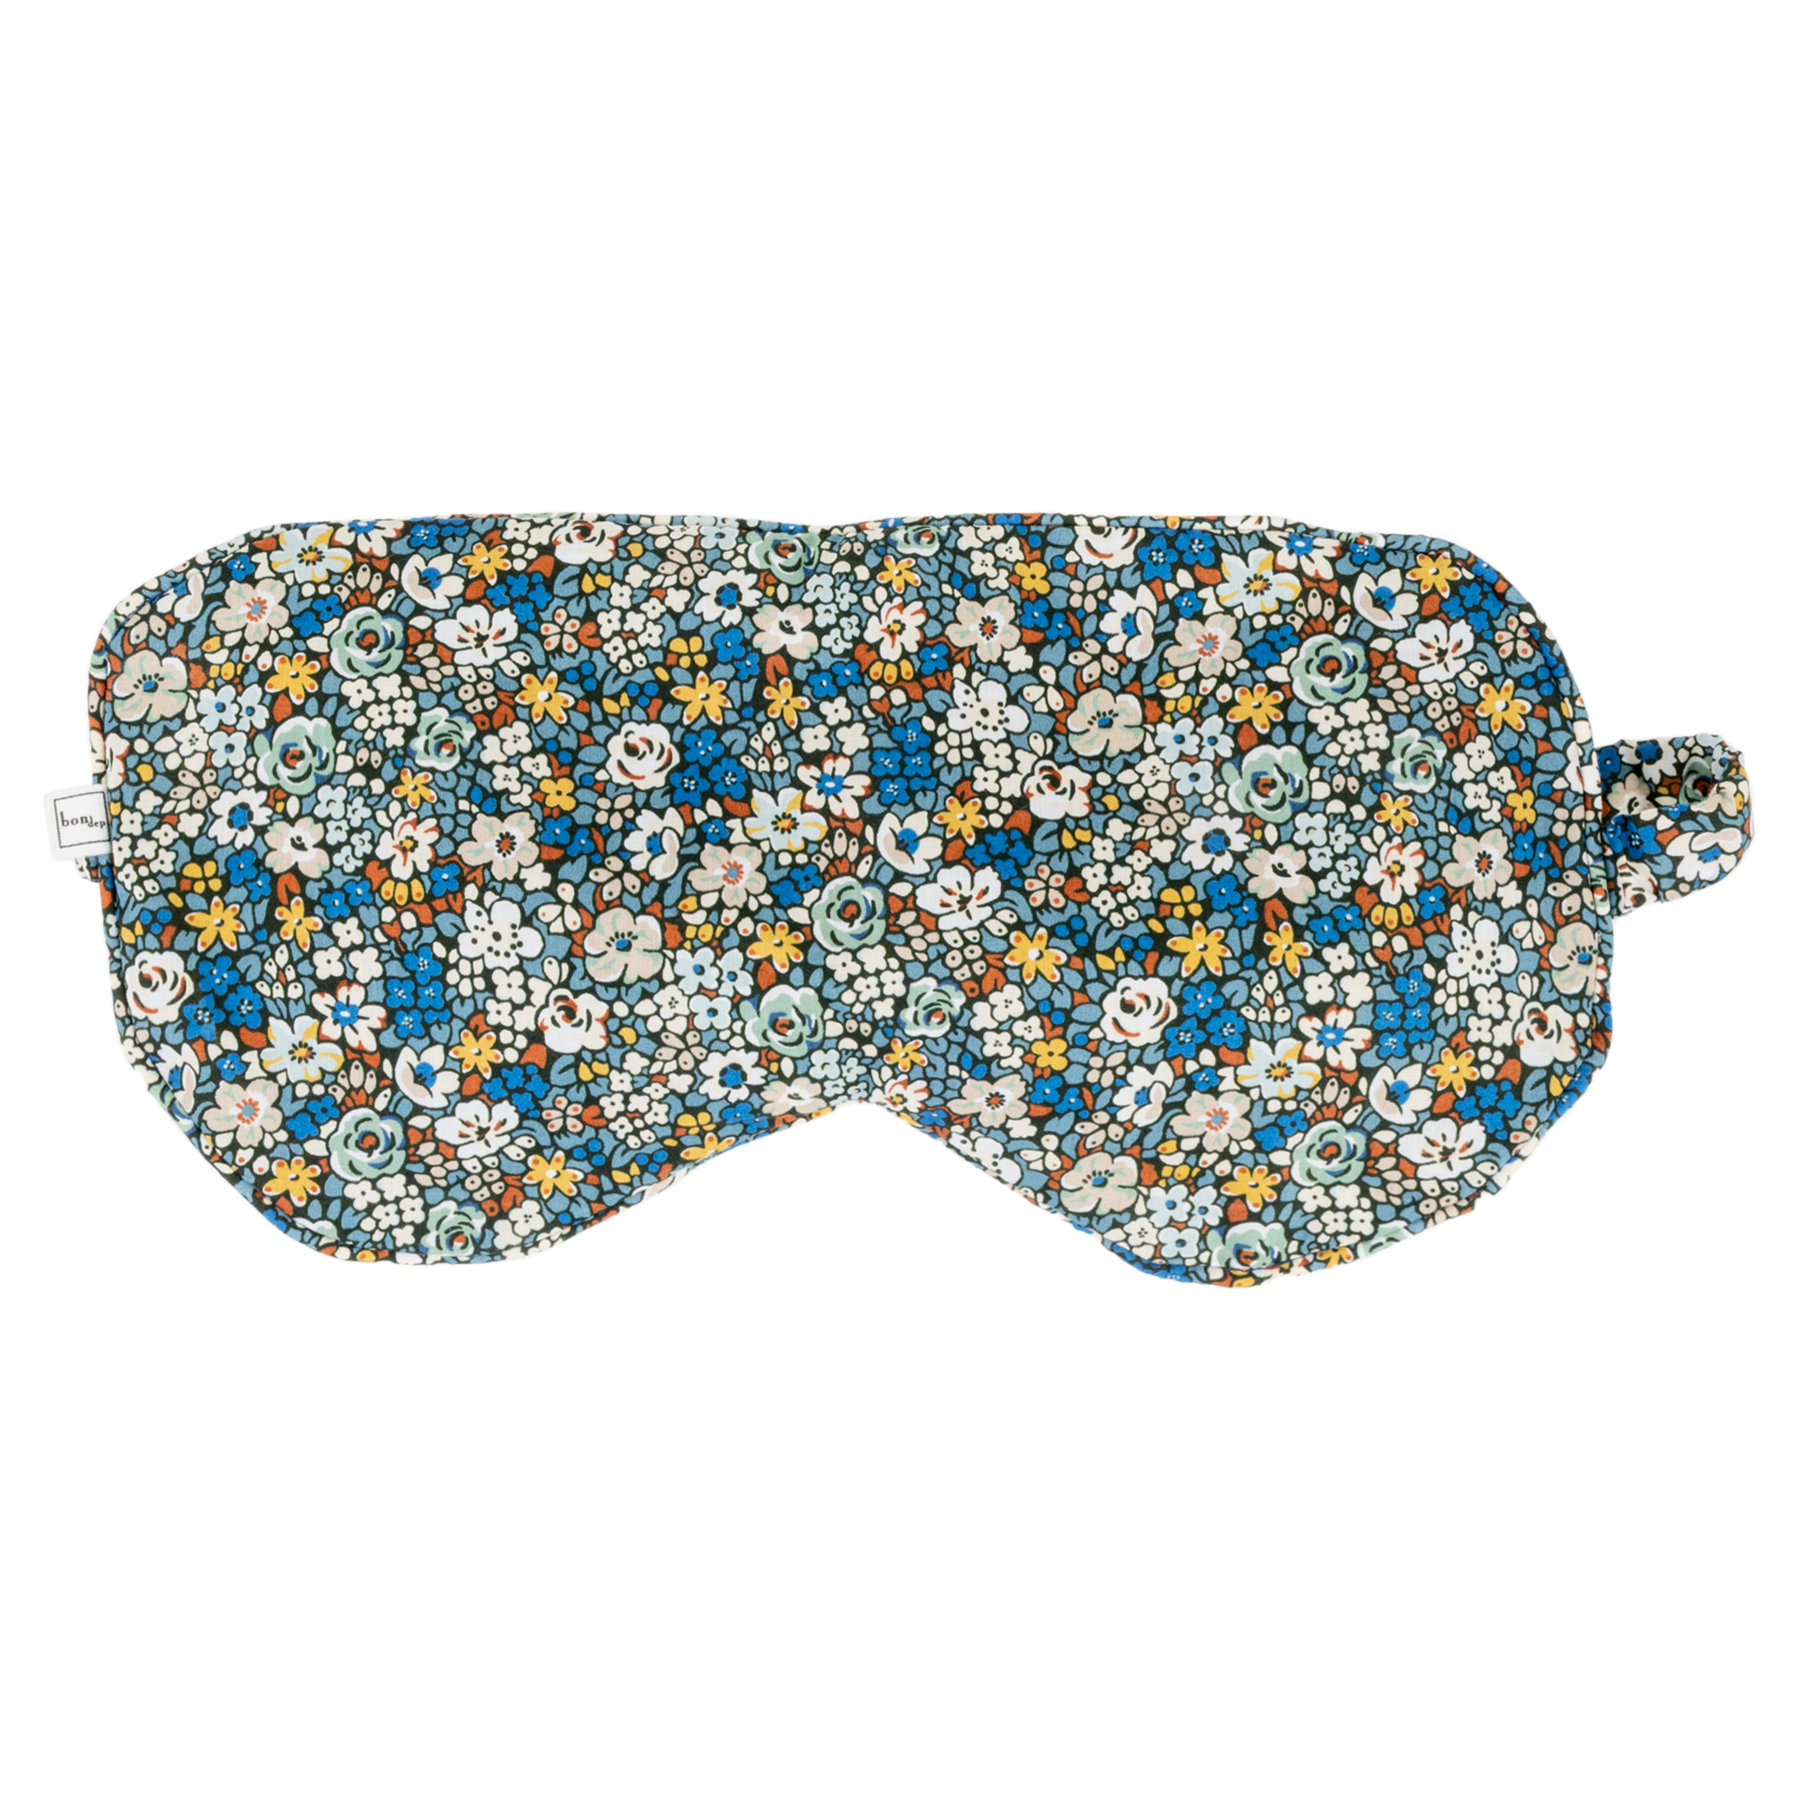 Image of Relaxing Eye masks mw Liberty Emma Louise from Bon Dep Essentials